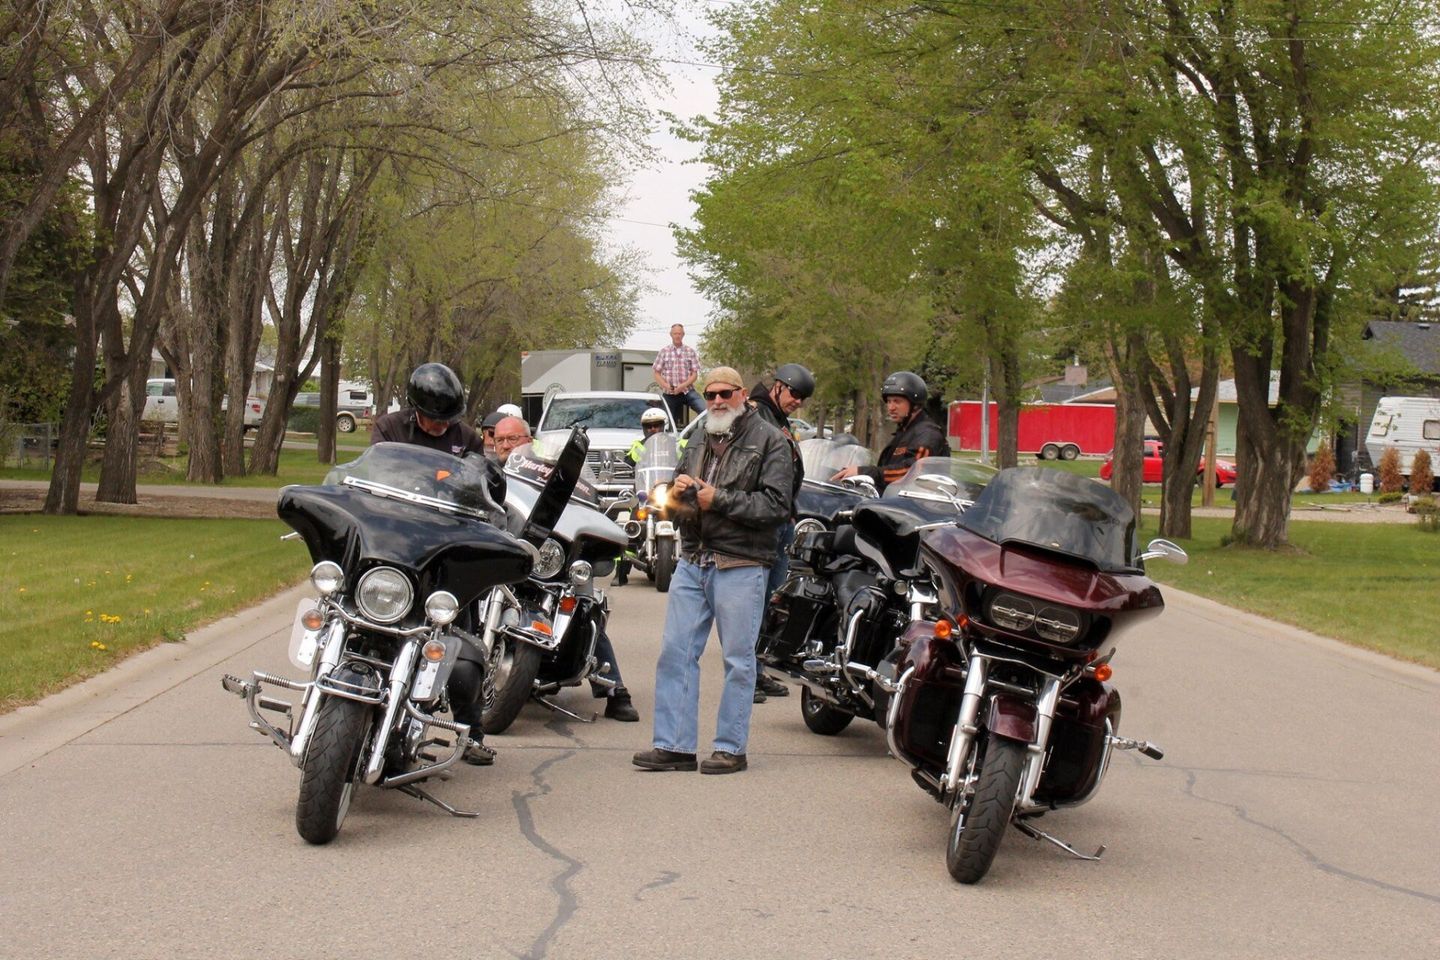 group photo of ride participants on motorcycles